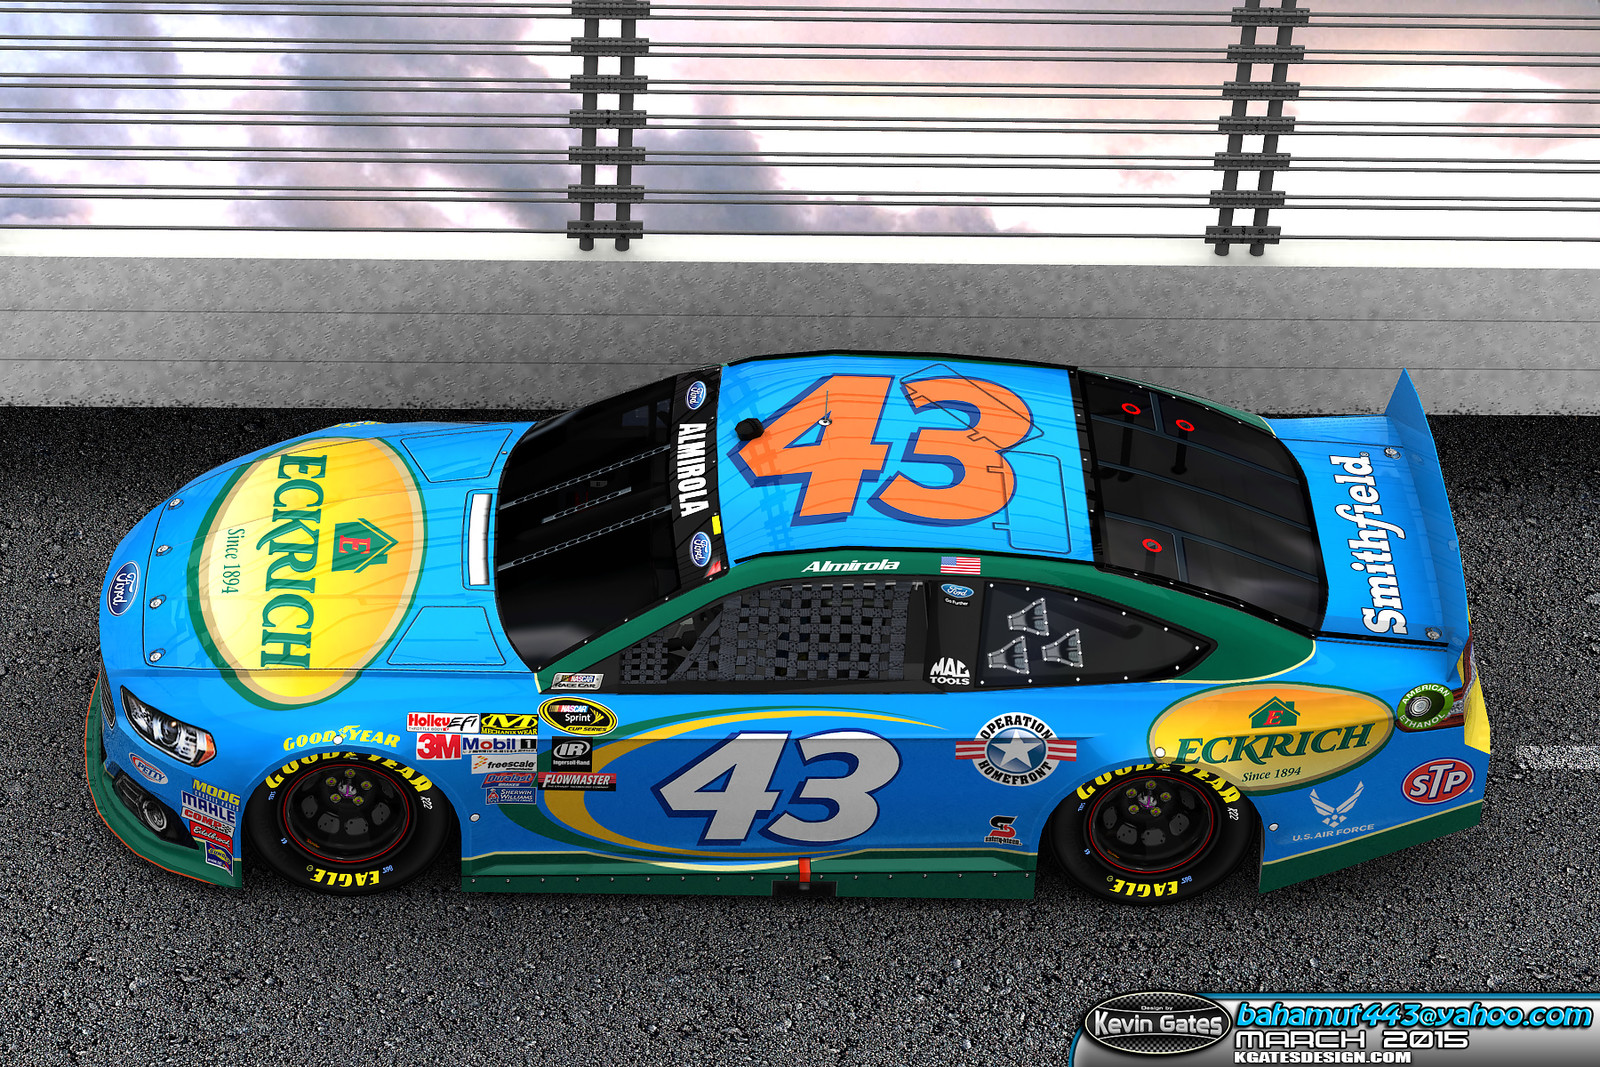 Autodesk 3DS Max render provided to Smithfield Foods depicting the 2015 #43 Eckrich paint scheme on track